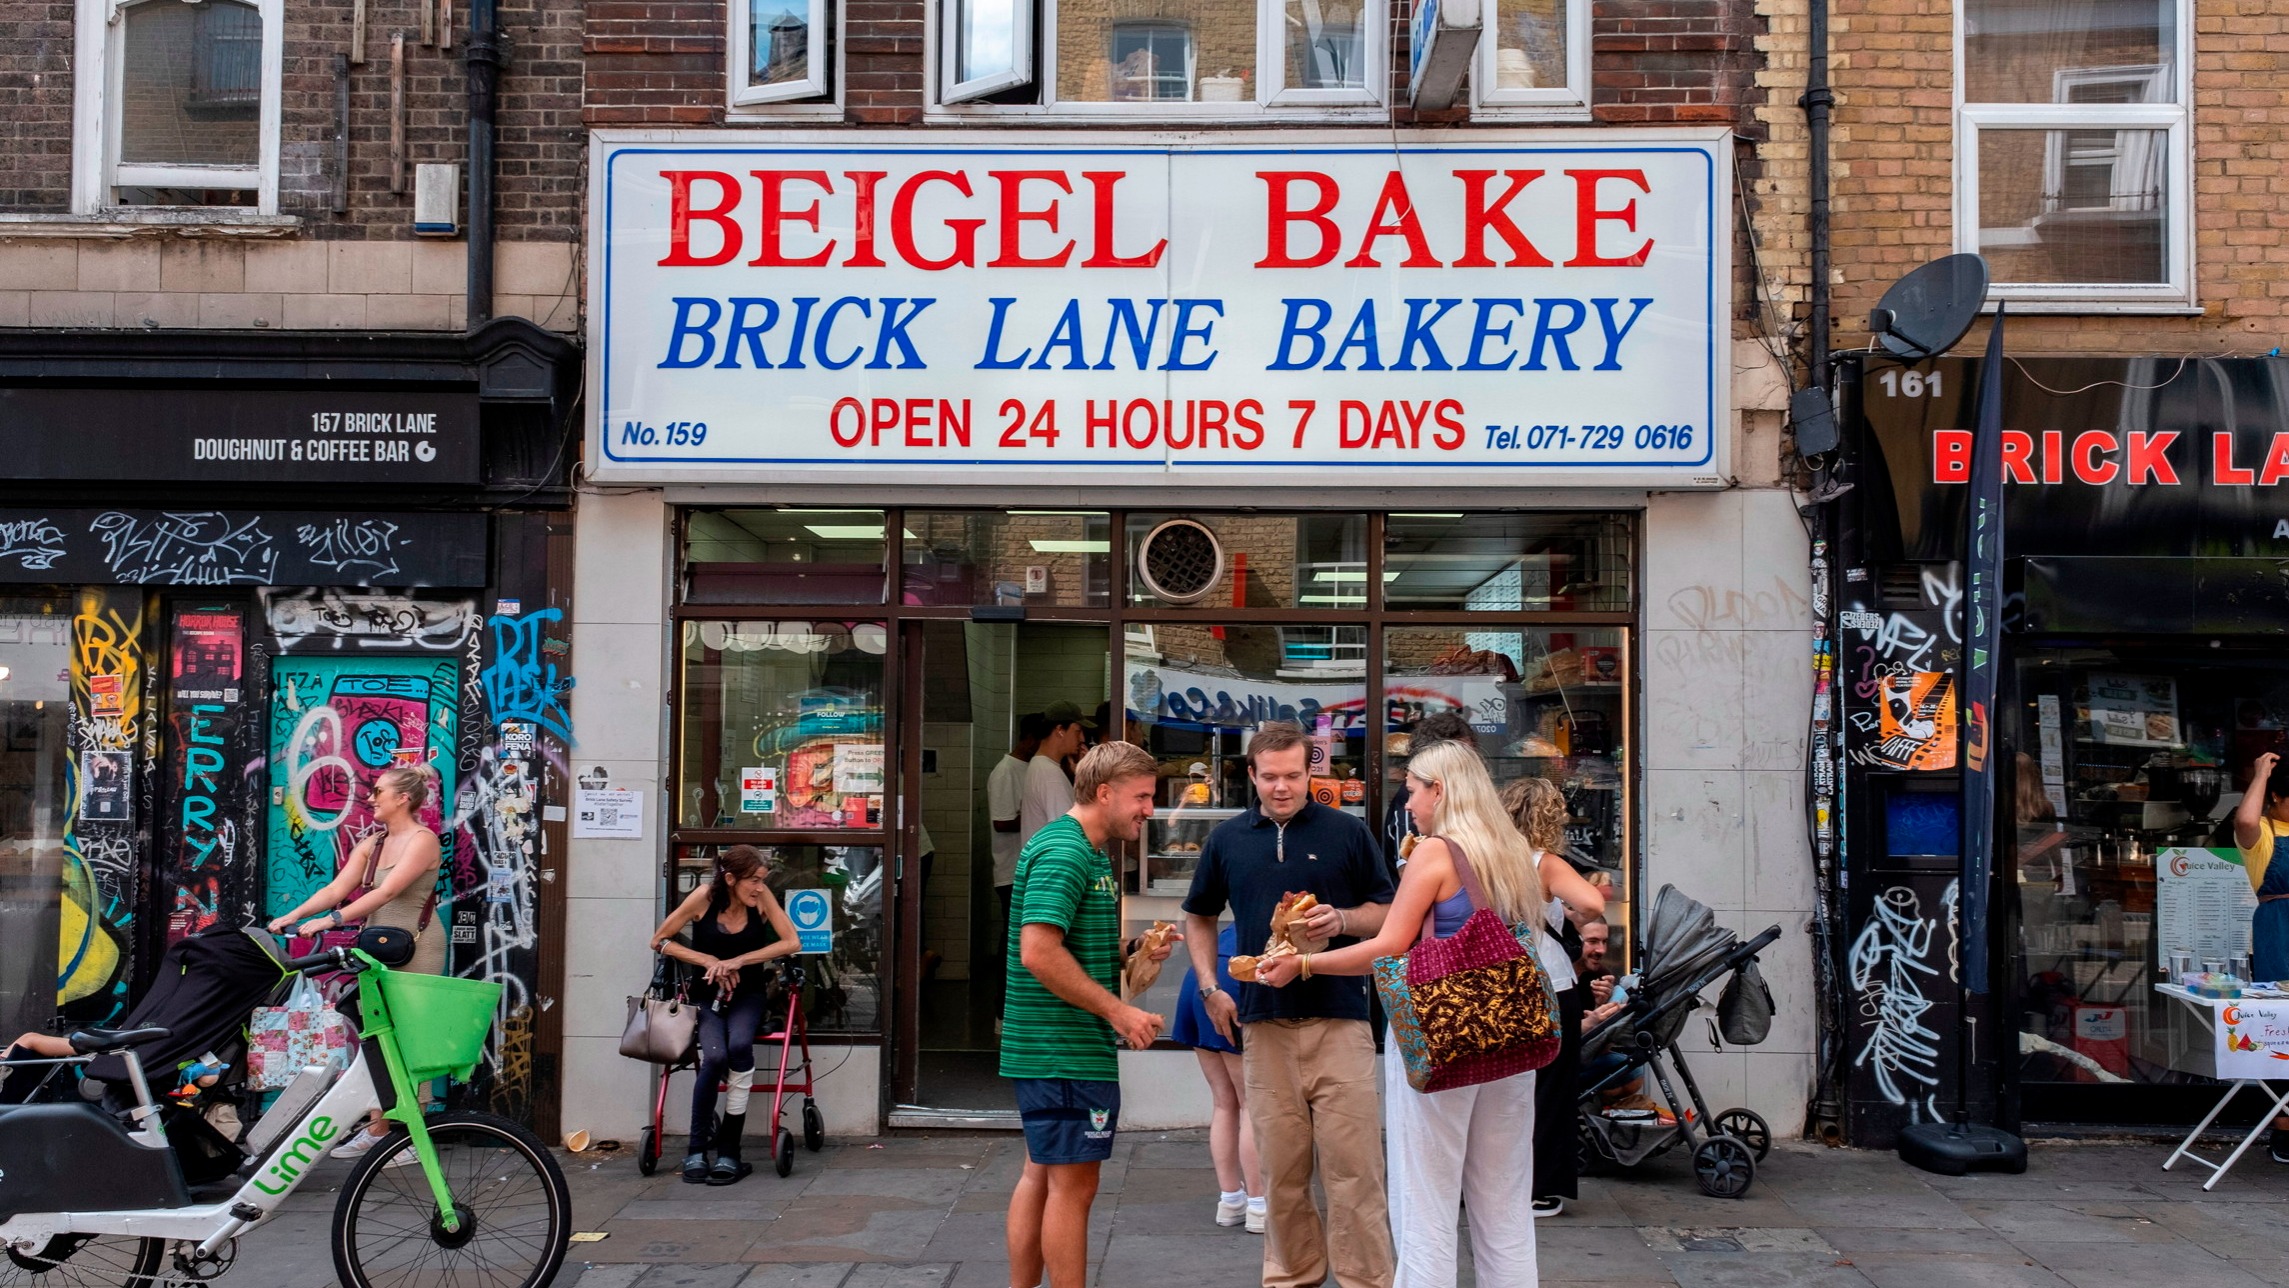 closure of beigel shop leaves a hole in london’s east end